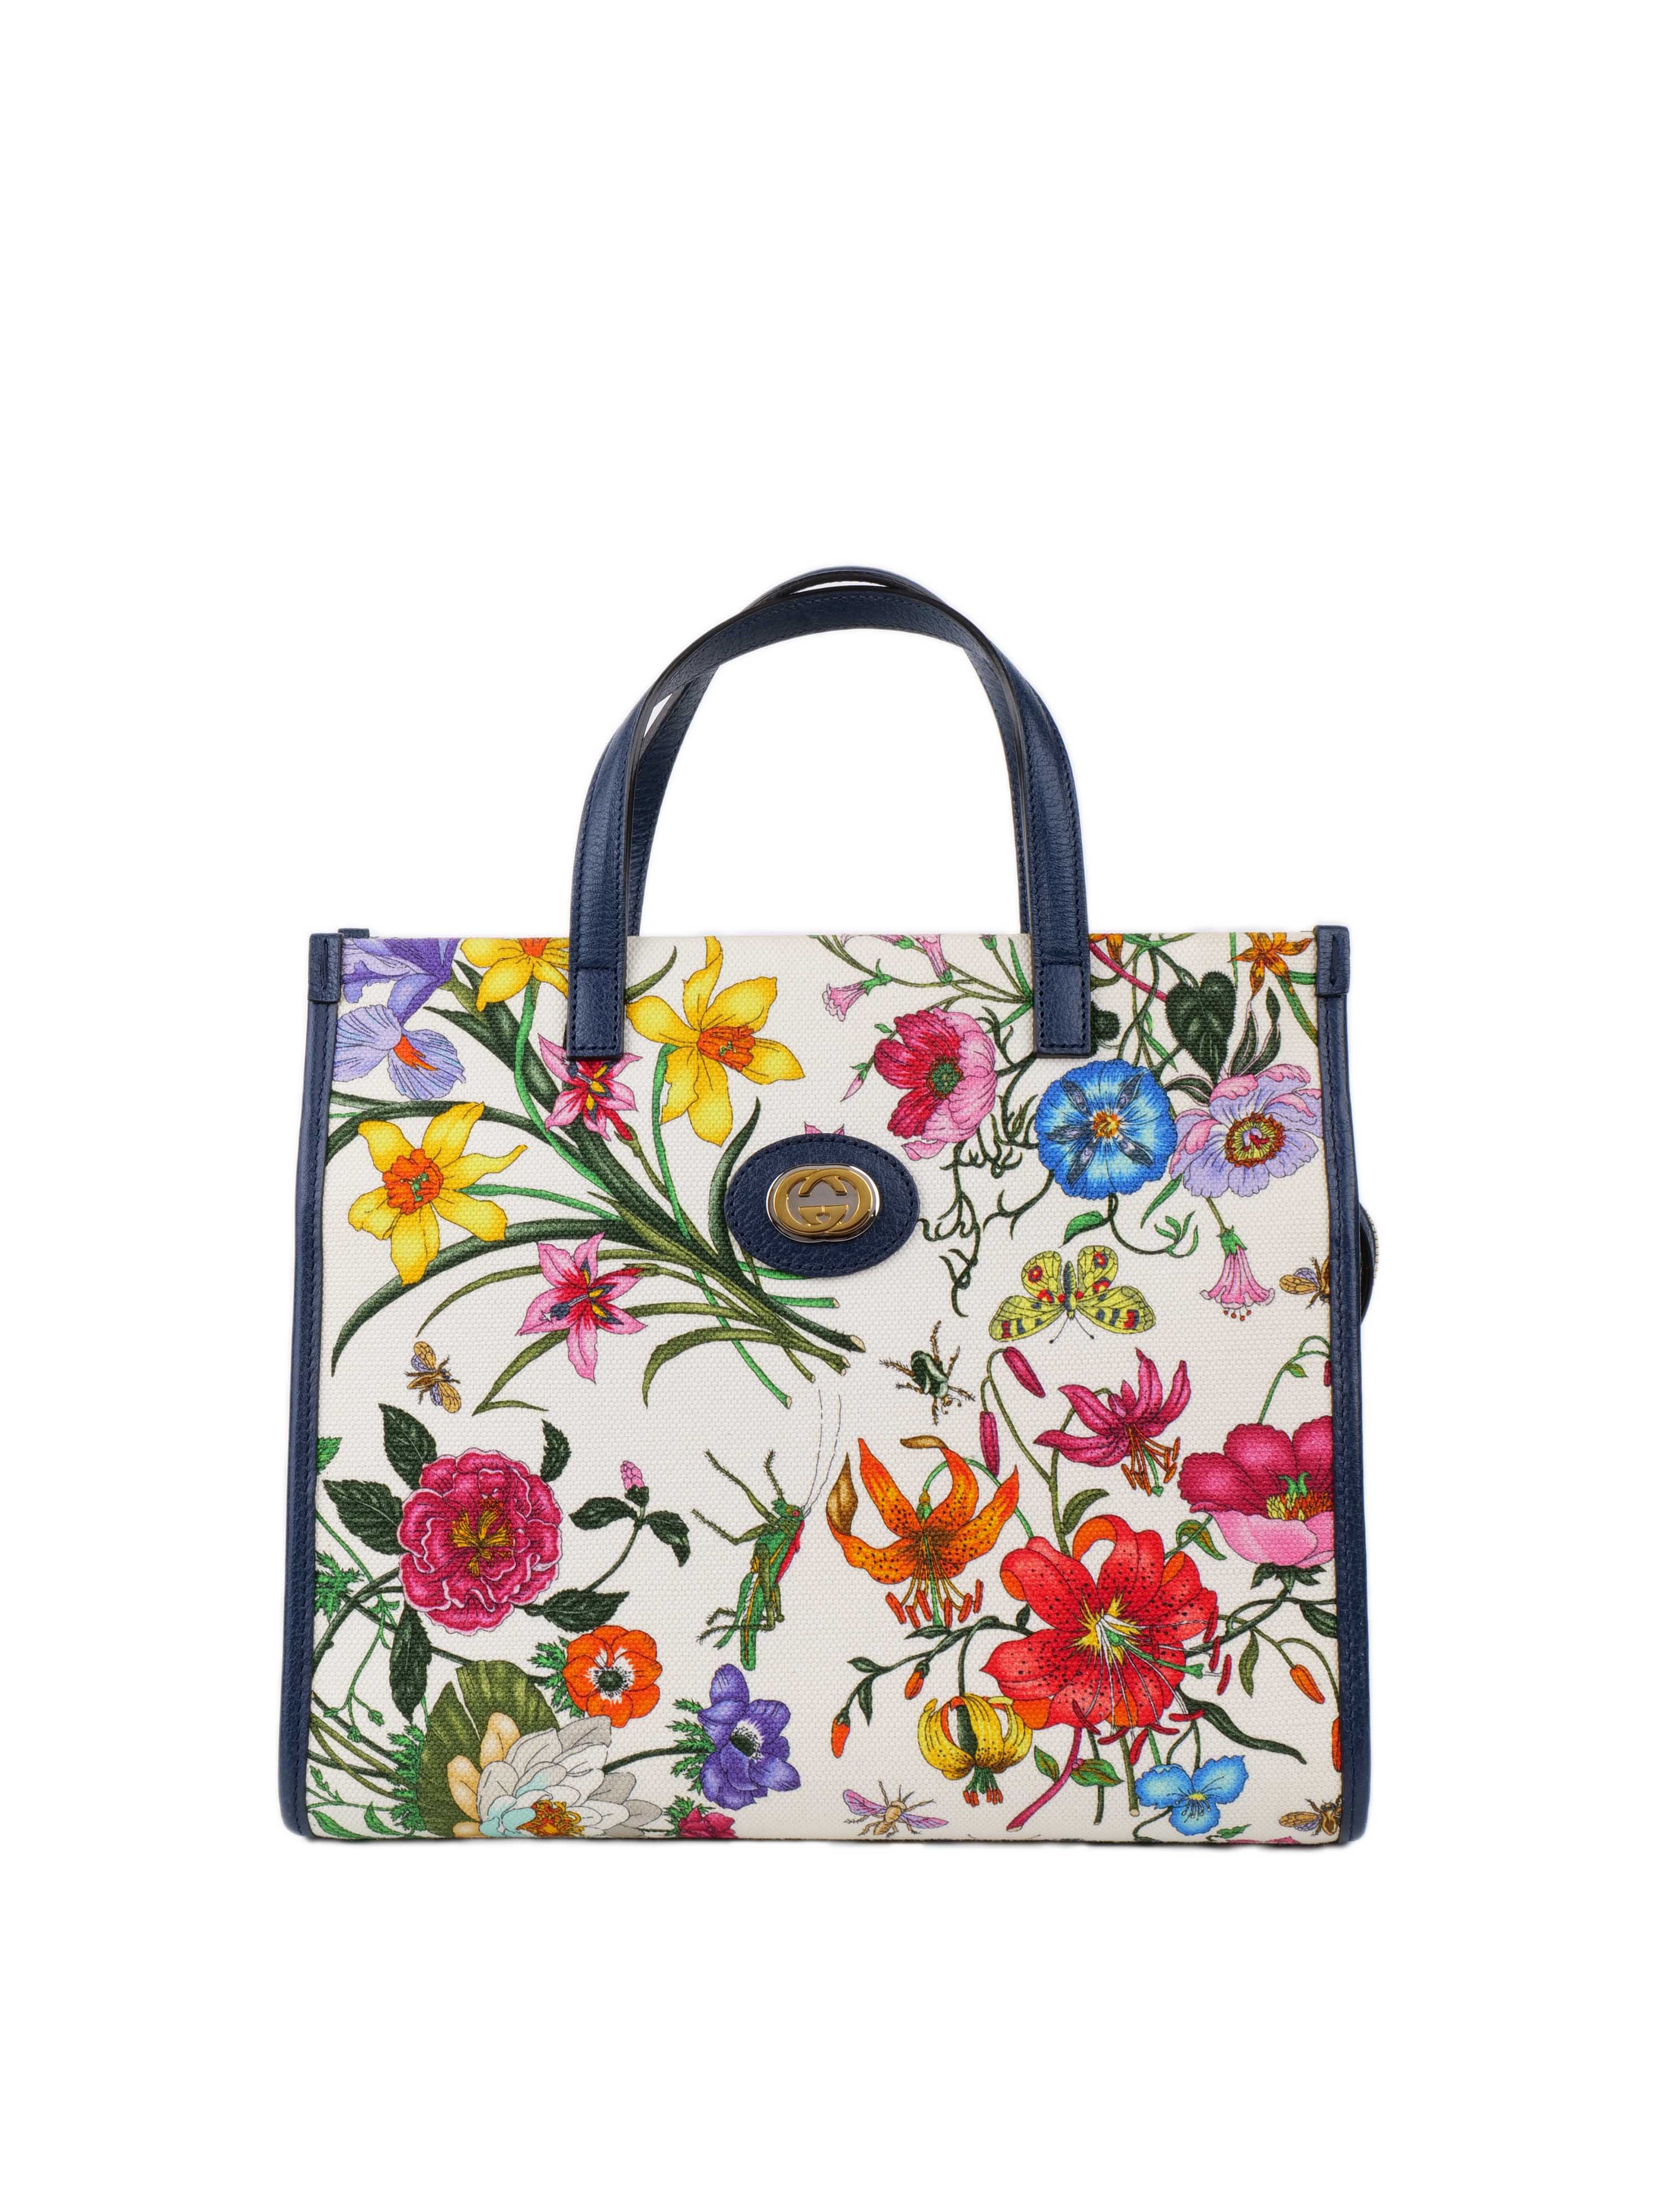 Gucci Floral Canvas Tote with Blue Leather Trim.